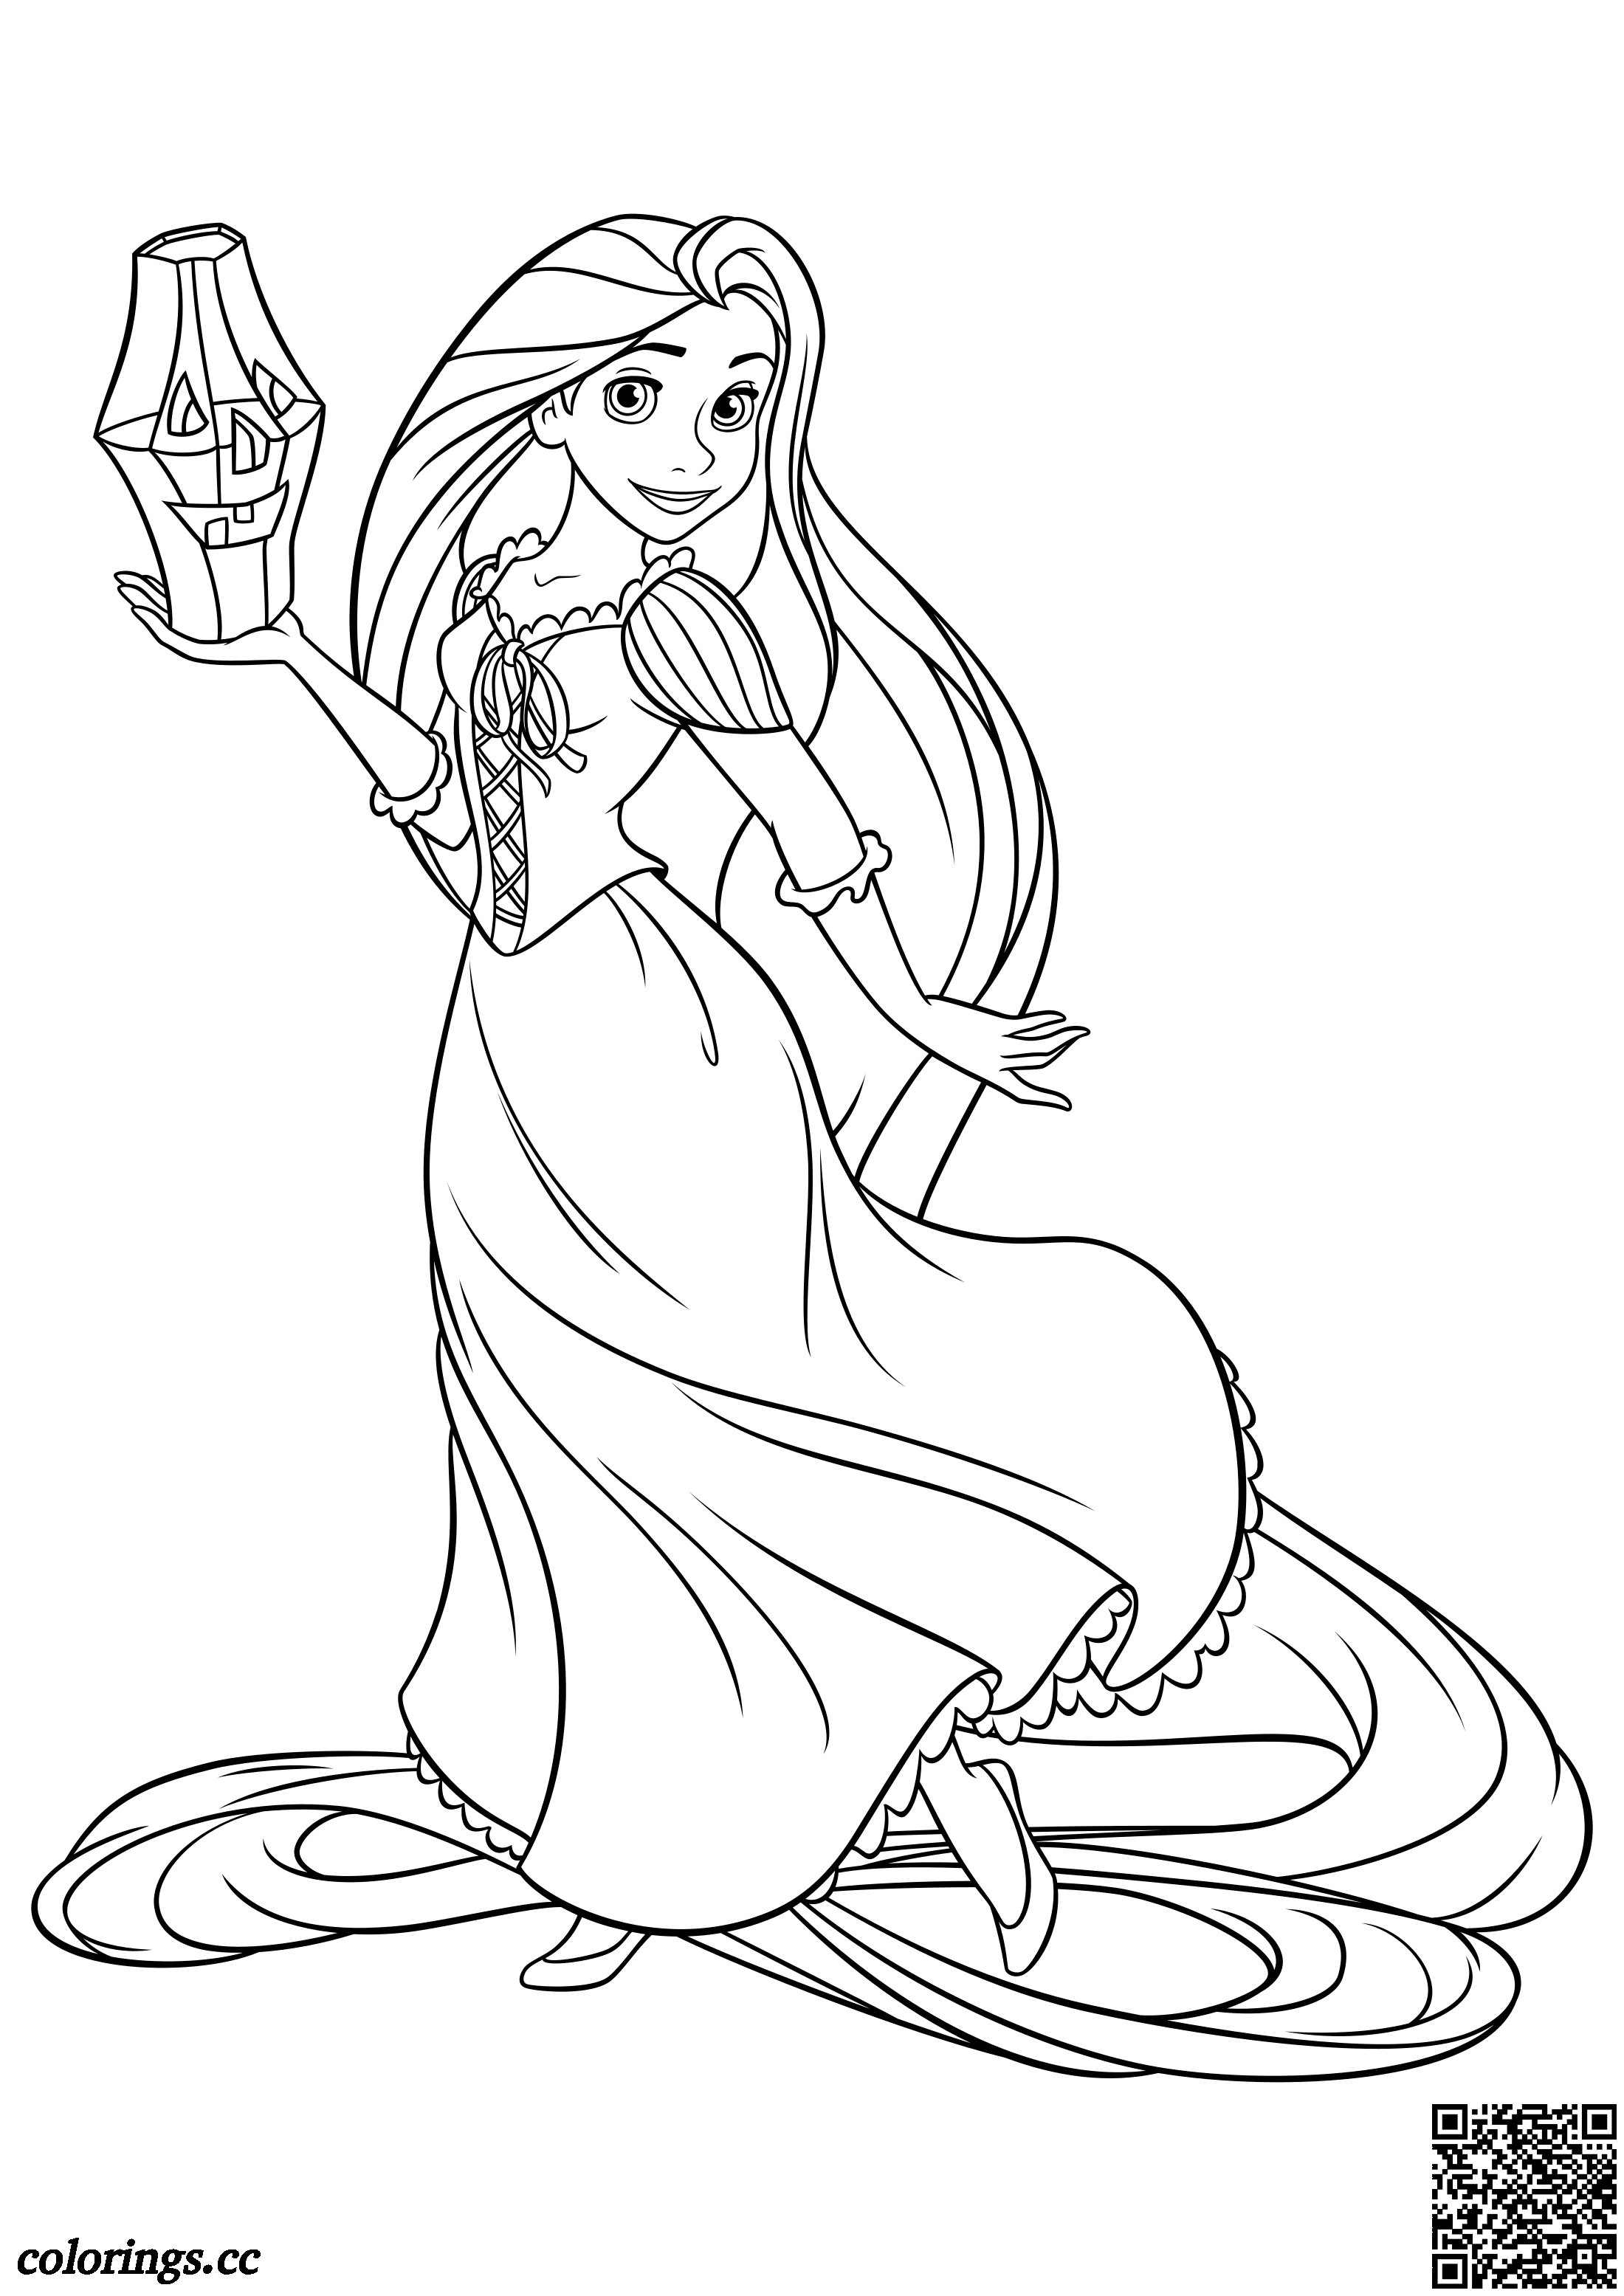 Rapunzel and Halloween Flashlight coloring pages, Disney princesses